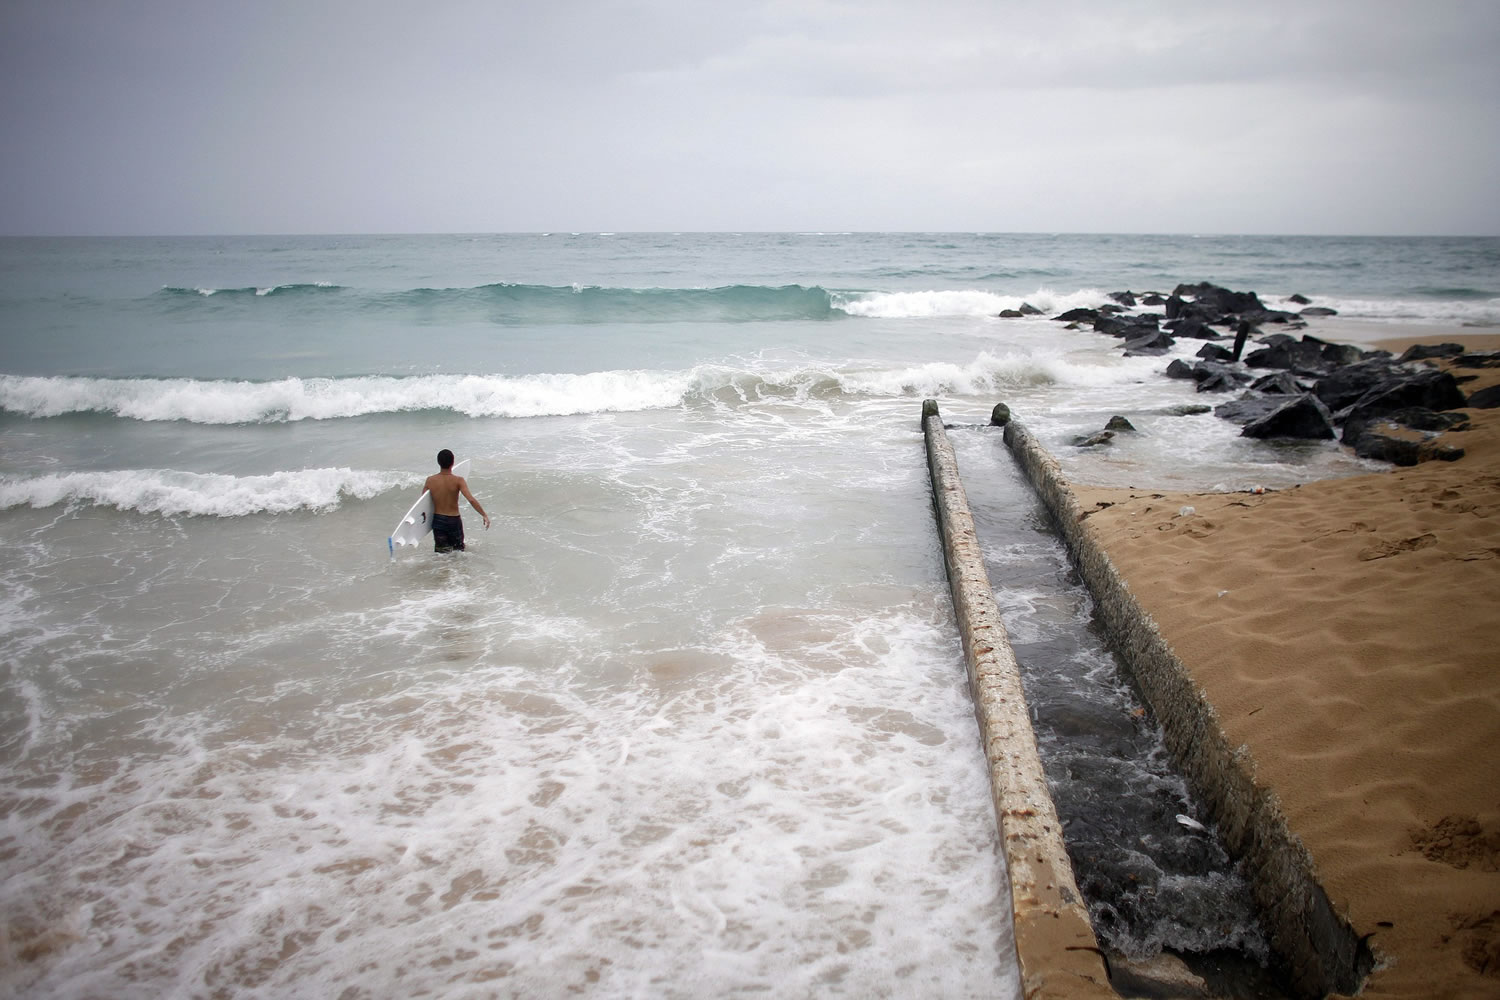 A surfer enters the water Saturday to take advantage of the high waves in San Juan, Puerto Rico.